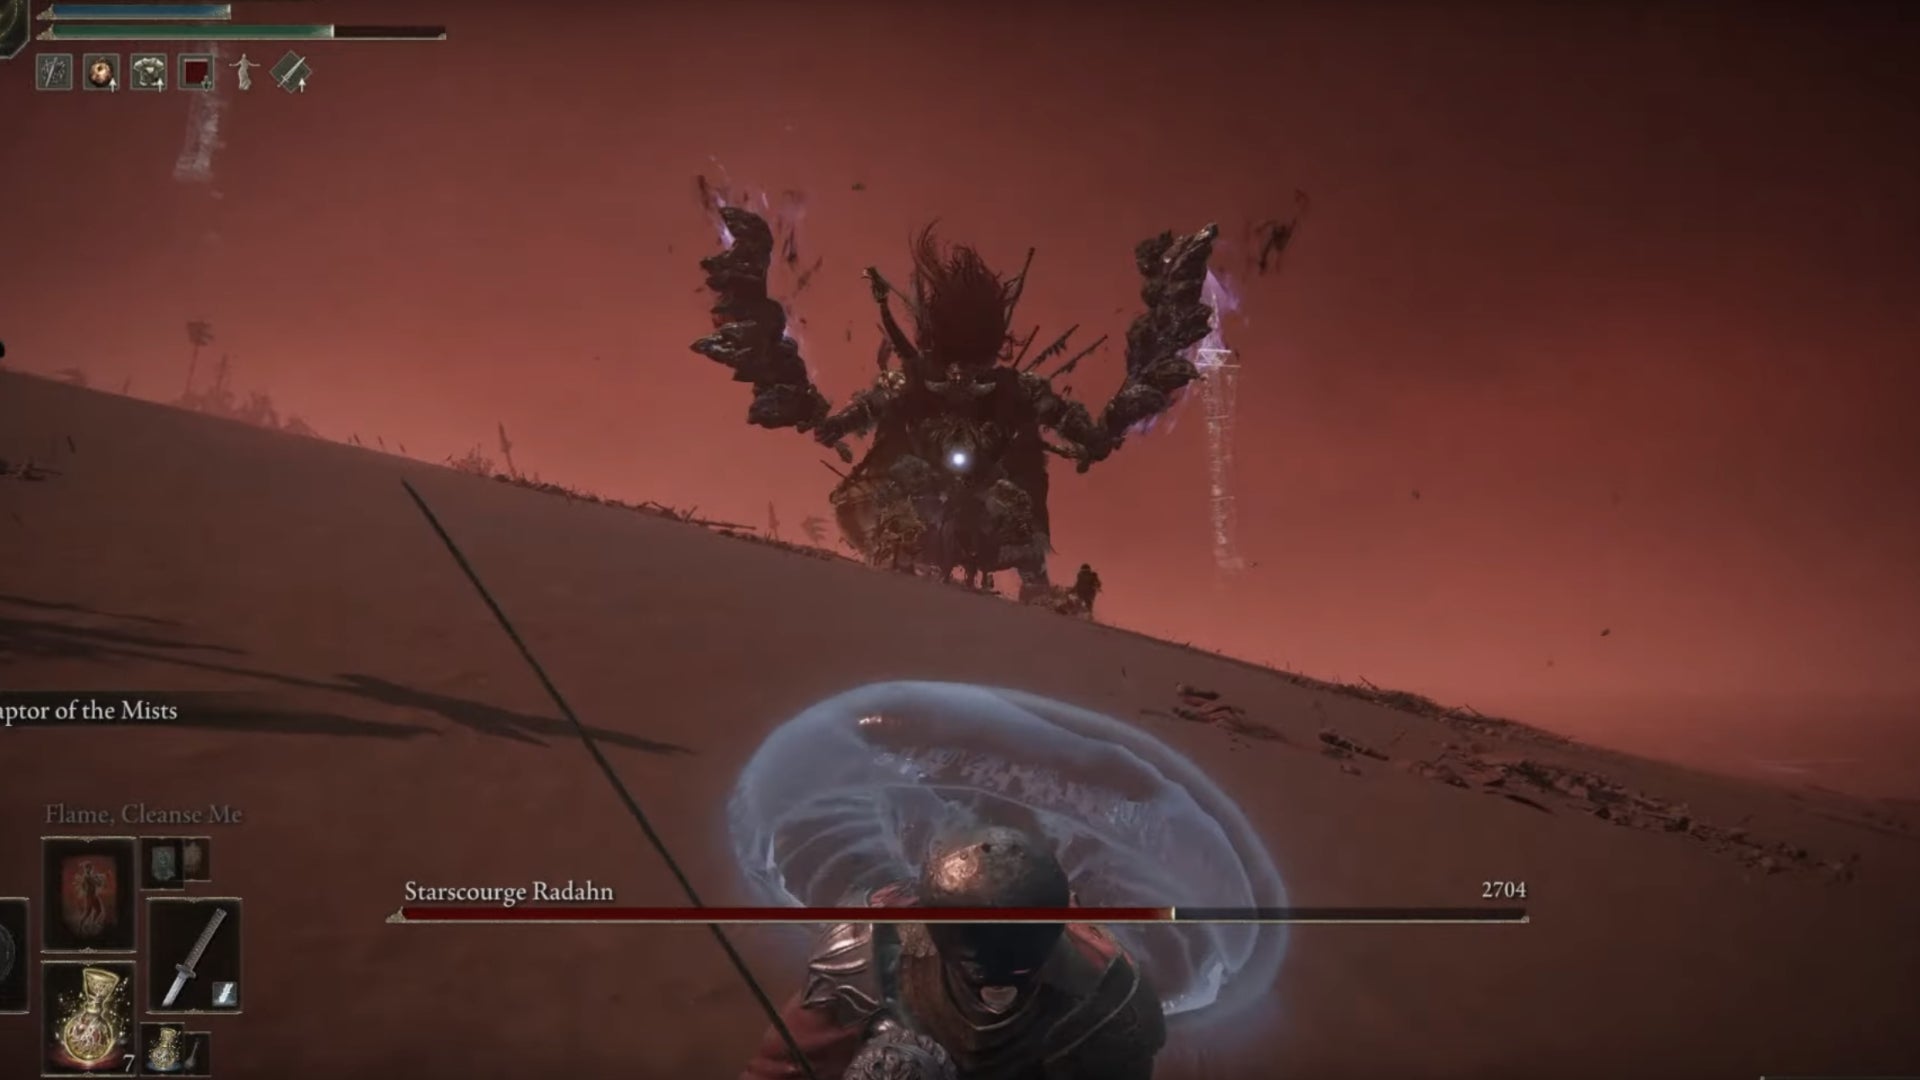 The player in Elden Ring retreats away from the boss Starscourge Radahn in order to heal.